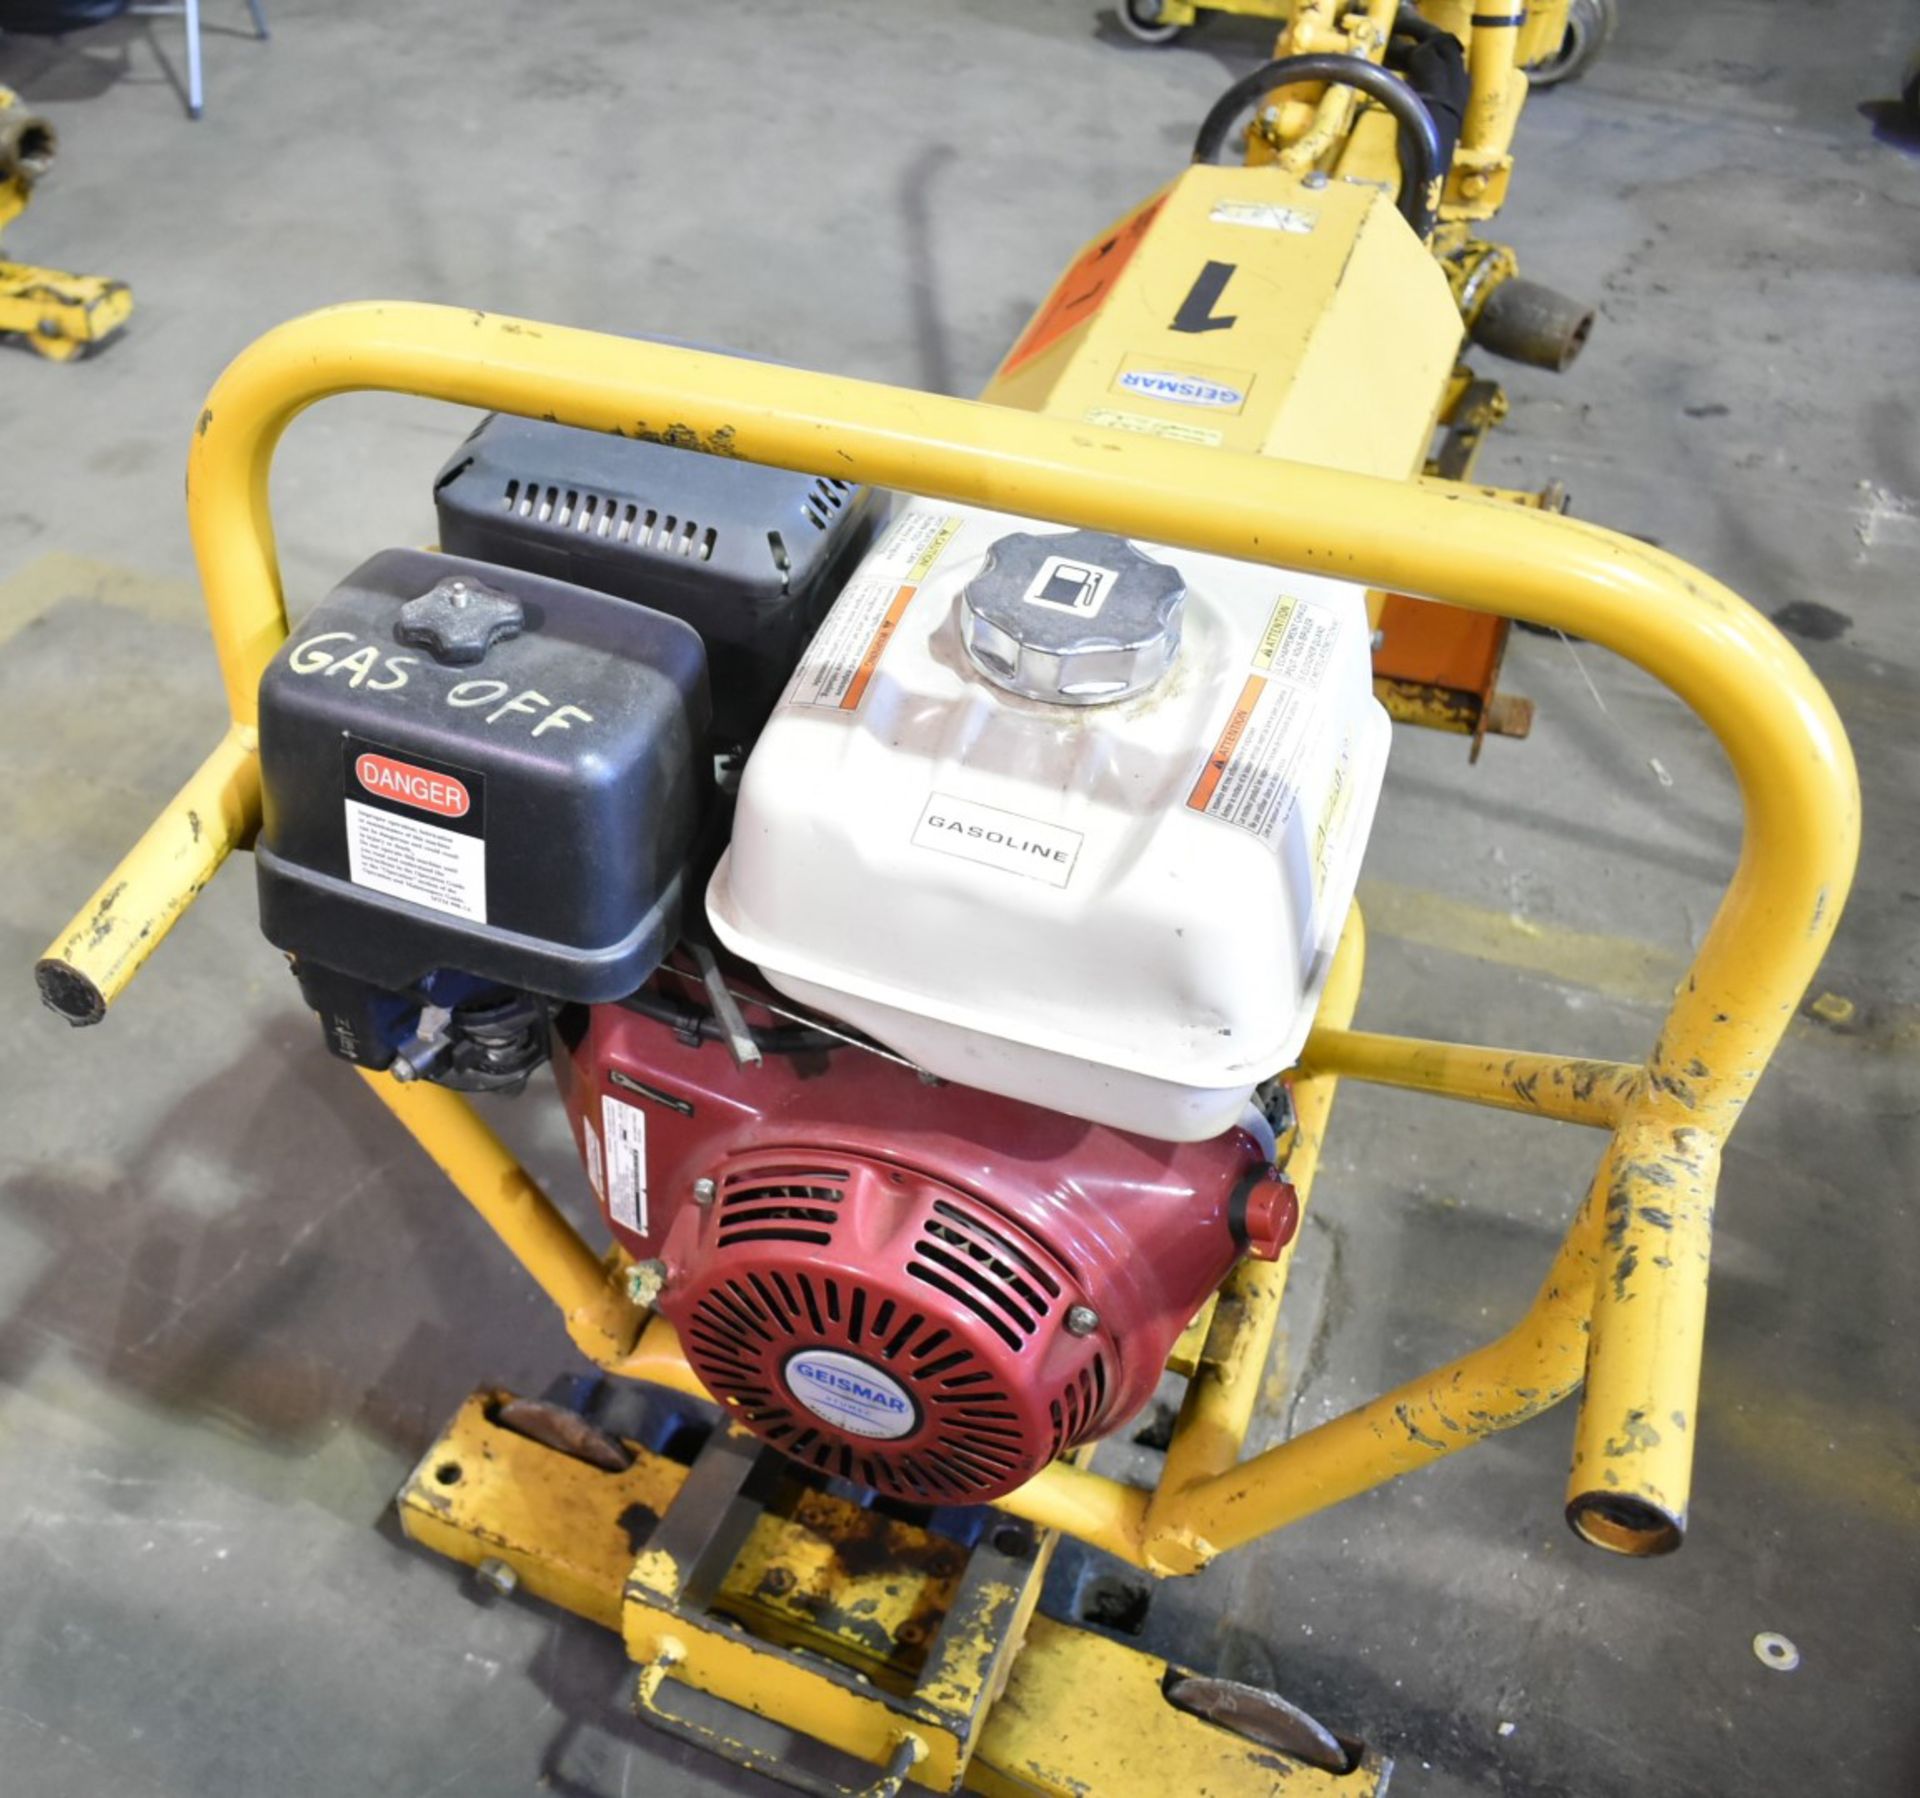 GESIMAR STUMEC (2015) BSR-8 RAIL CART MOUNTED TRACK WRENCH WITH HONDA GAS ENGINE S/N: 1088191 - Image 3 of 5